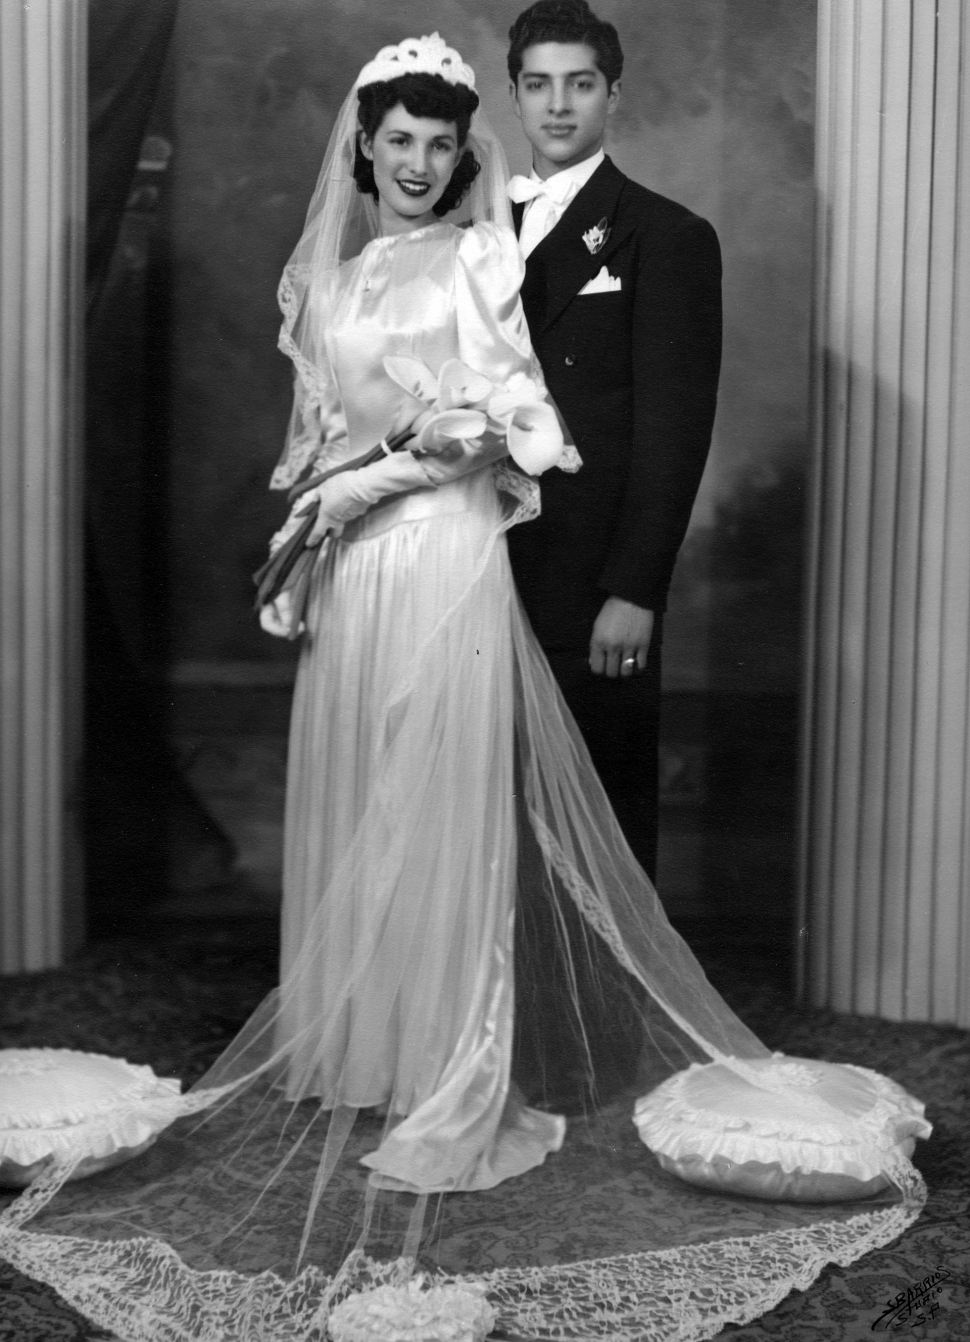 Manual and Connie Victoria Wedding Picture, date unknown. 